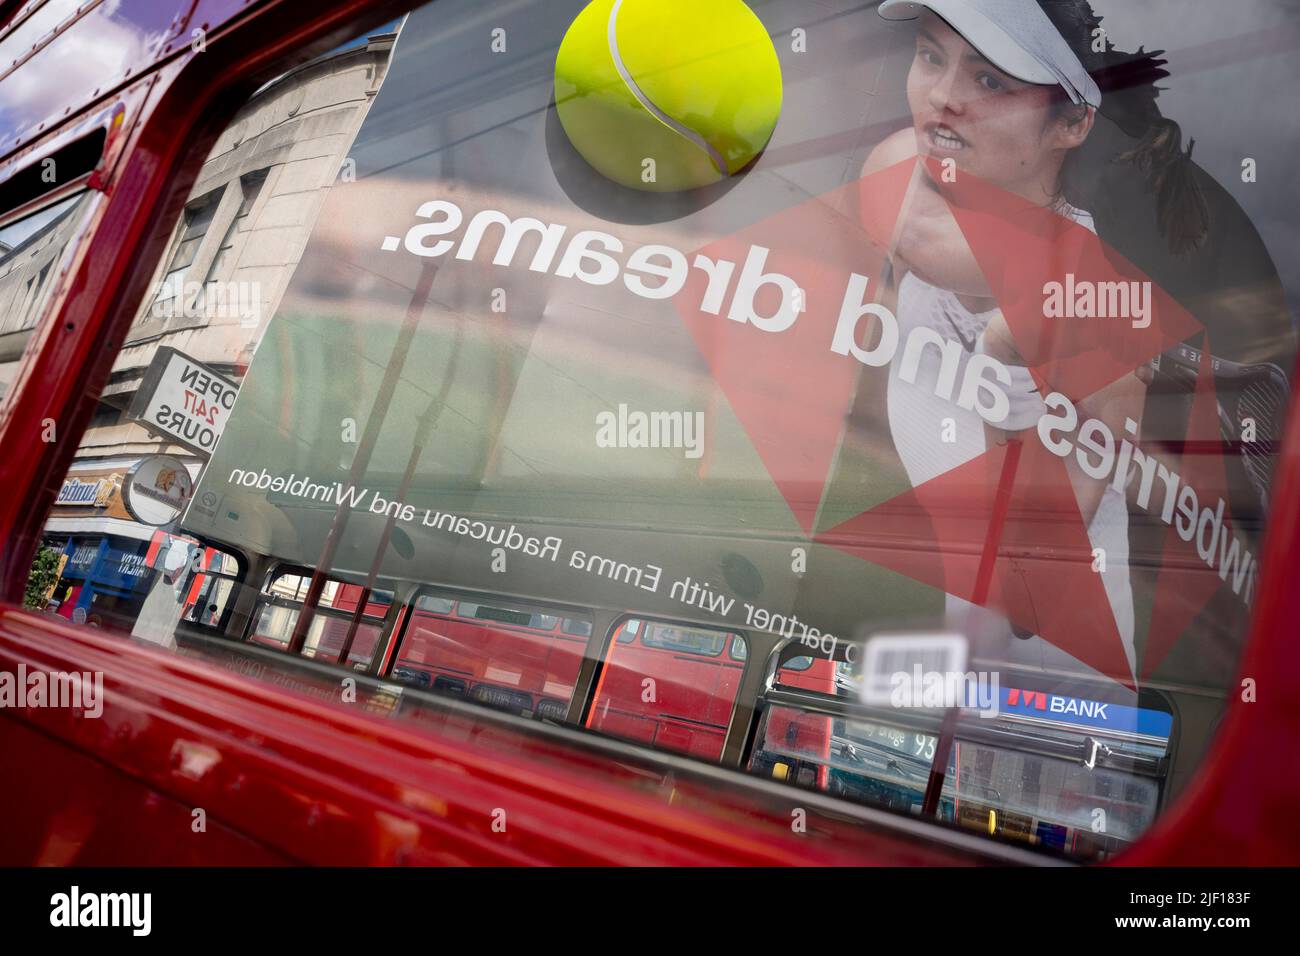 Reflected in the window of a bus, British tennis player, Emma Raducanu appears on a giant billboard in Wimbledon town centre, on the second day of competition during the Wimbledon Lawn Tennis Association championships, on 28th June 2022, in London, England. Stock Photo